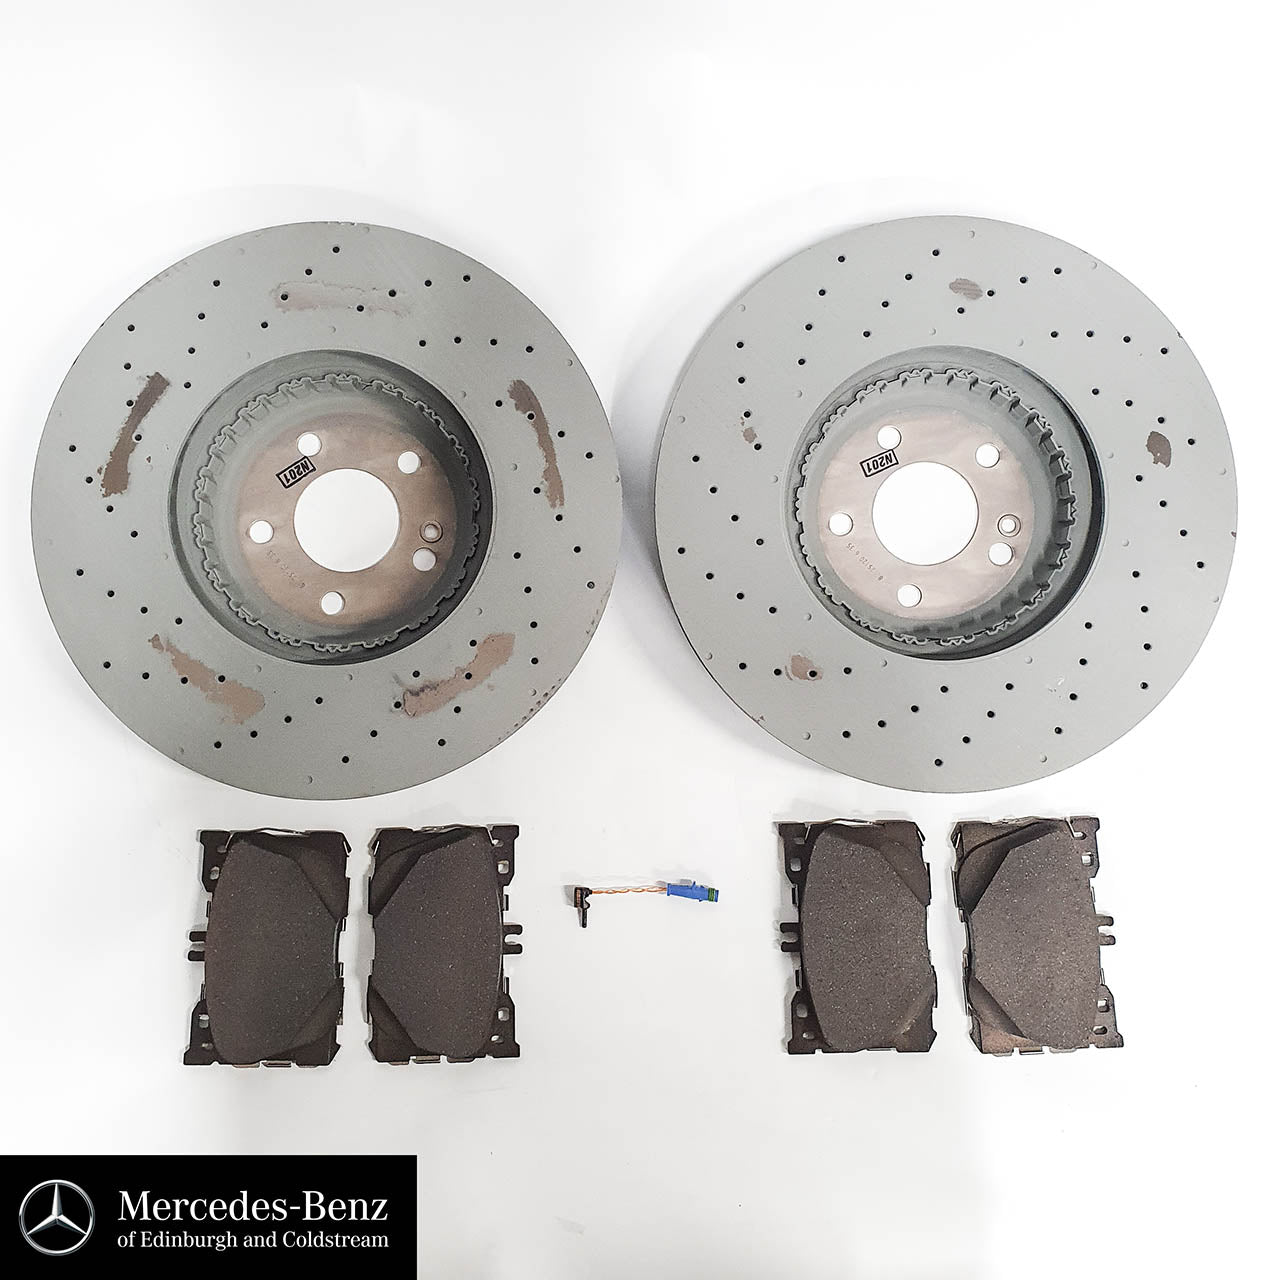 Brake discs, pads and wear sensors front for E Class, GLC 250 d 4MATIC